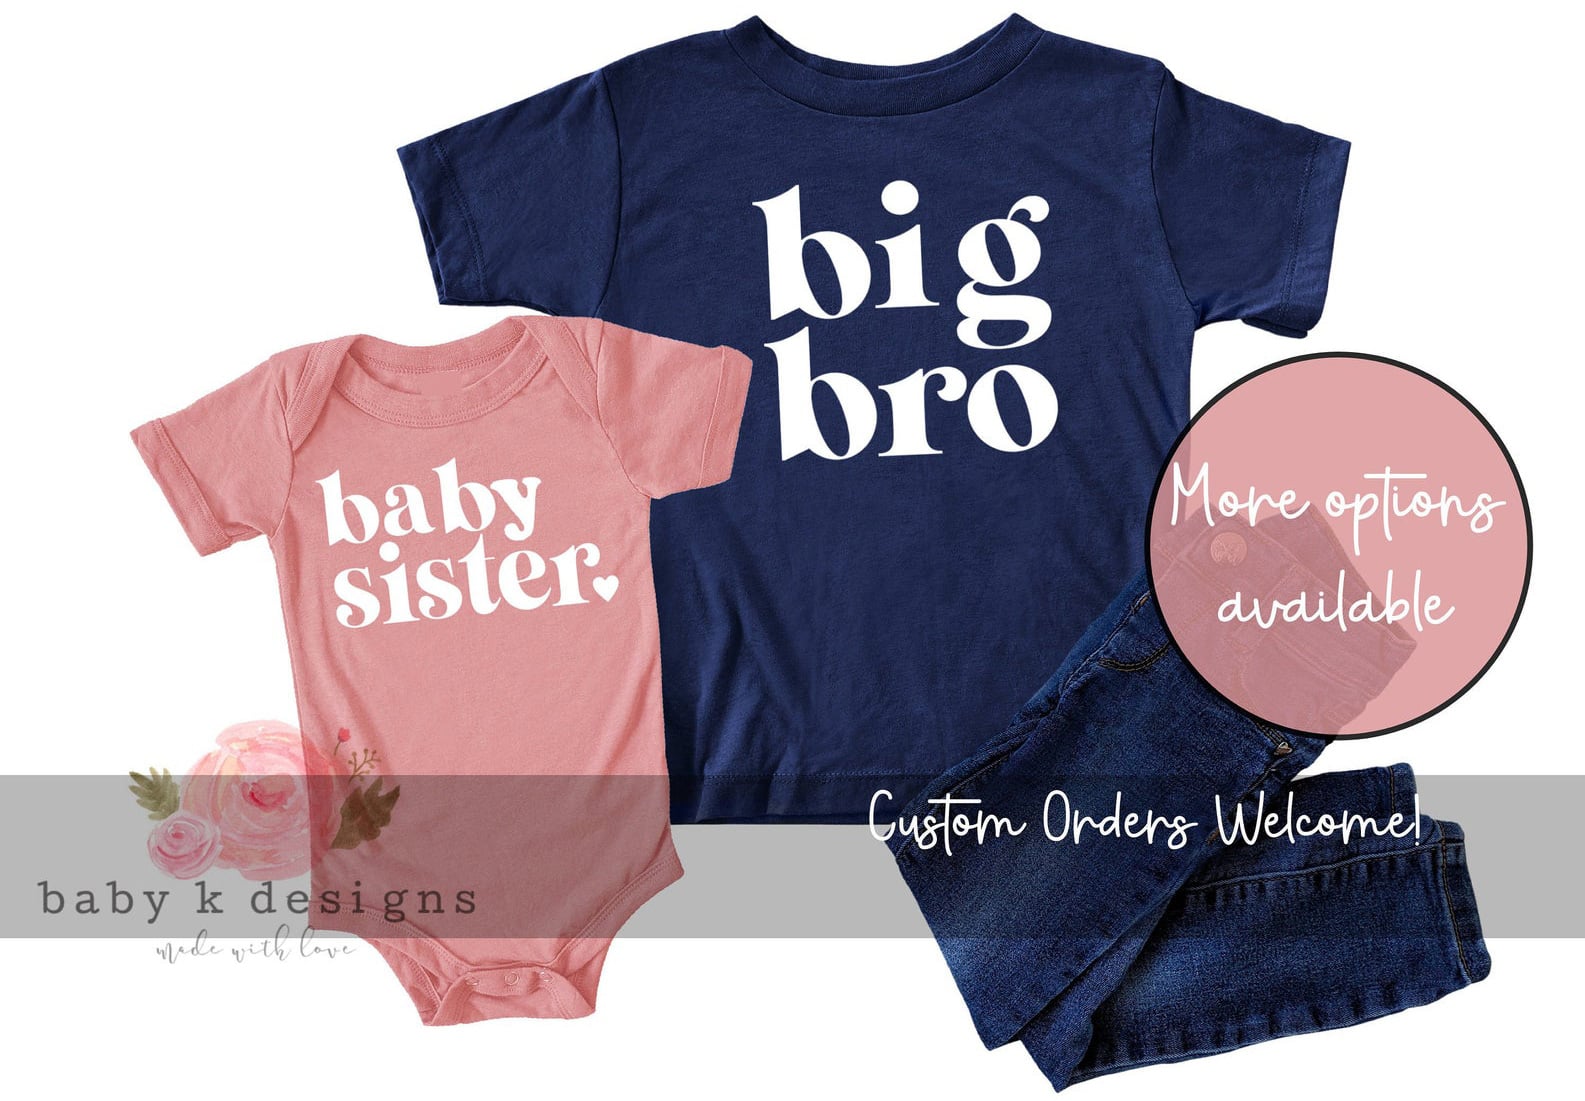 Great Gift Ideas From an Older Sibling to the New Baby